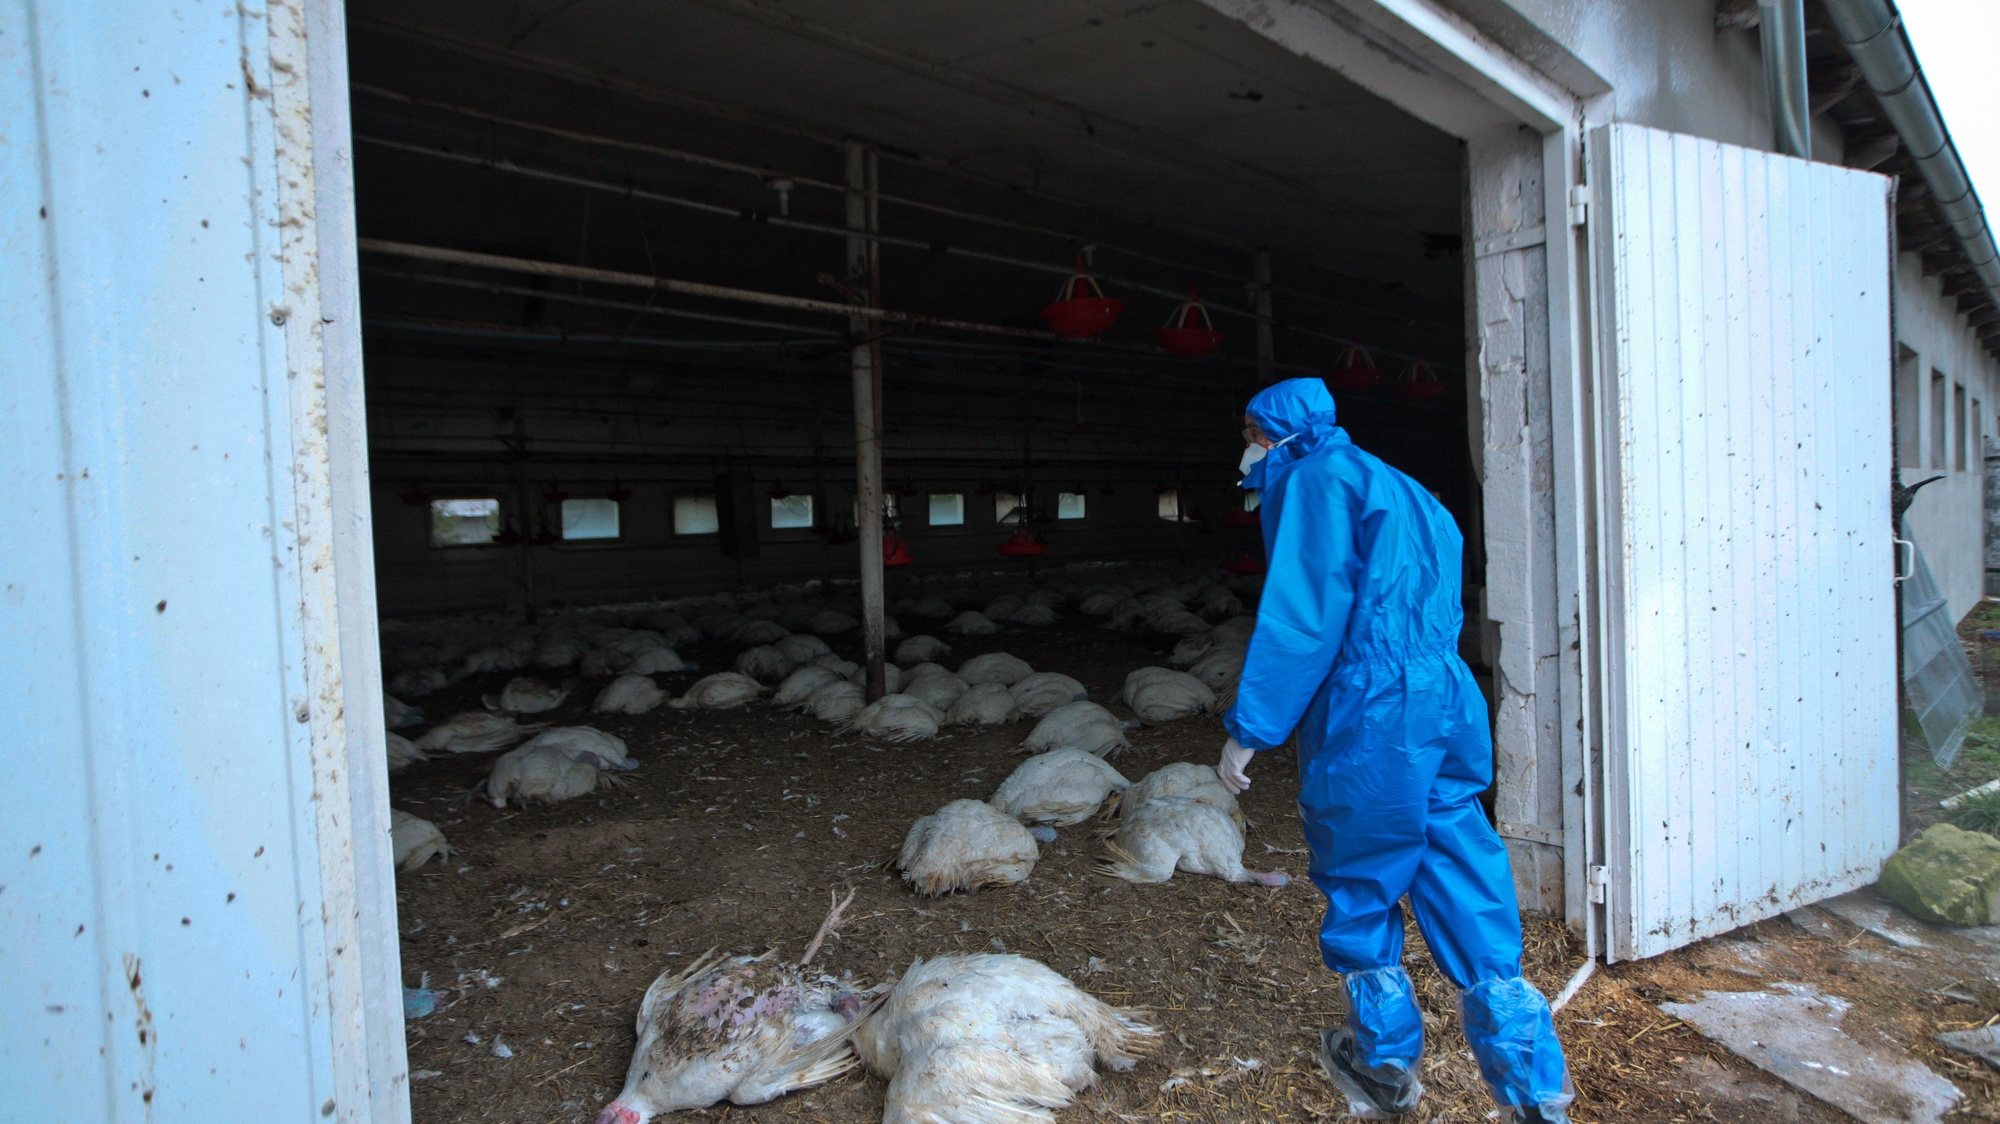 epa09025766 (FILE) - A health worker takes part in an exercise to cull and destroy poultry affected by the H5N8 virus, also known as bird flu at a poultry farm in Glinik, Poland 19 December 2016 (reissued 20 February 2021). Russian authorities on 20 February 2021 said they had detected the first human case of Highly Contagious Bird Flu H5N8 after seven people tested positive for H5N8 at a poultry farm in southern Russia.  EPA/LECH MUSZYNSKI POLAND OUT *** Local Caption *** 53179510